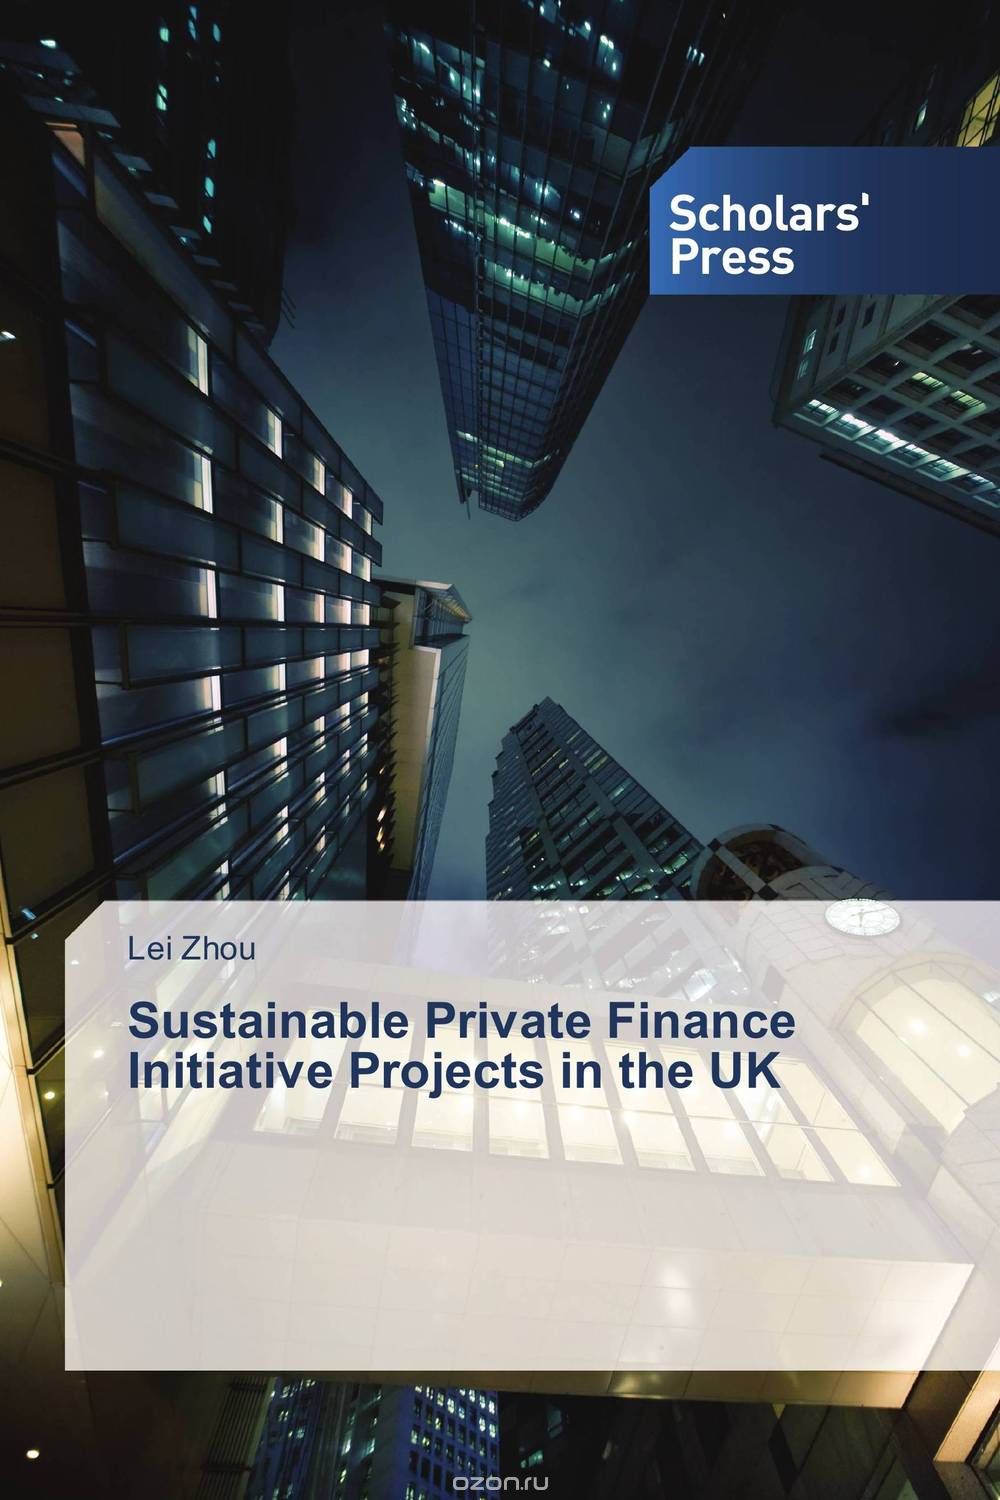 Скачать книгу "Sustainable Private Finance Initiative Projects in the UK"